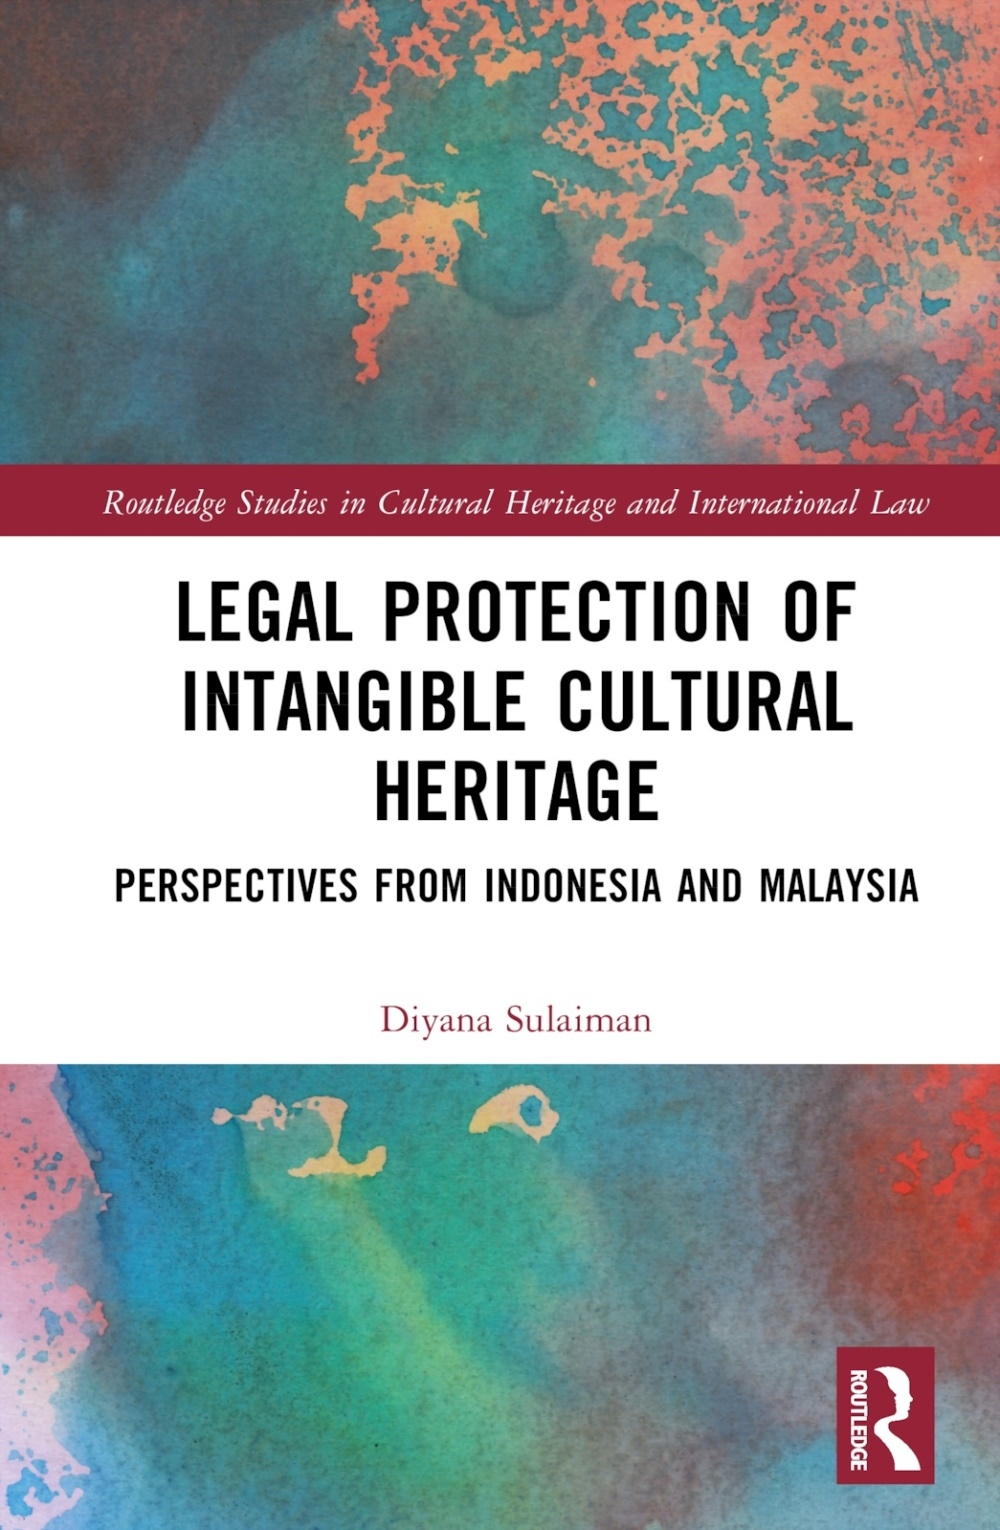 Legal Protection of Intangible Cultural Heritage: Perspectives from Indonesia and Malaysia